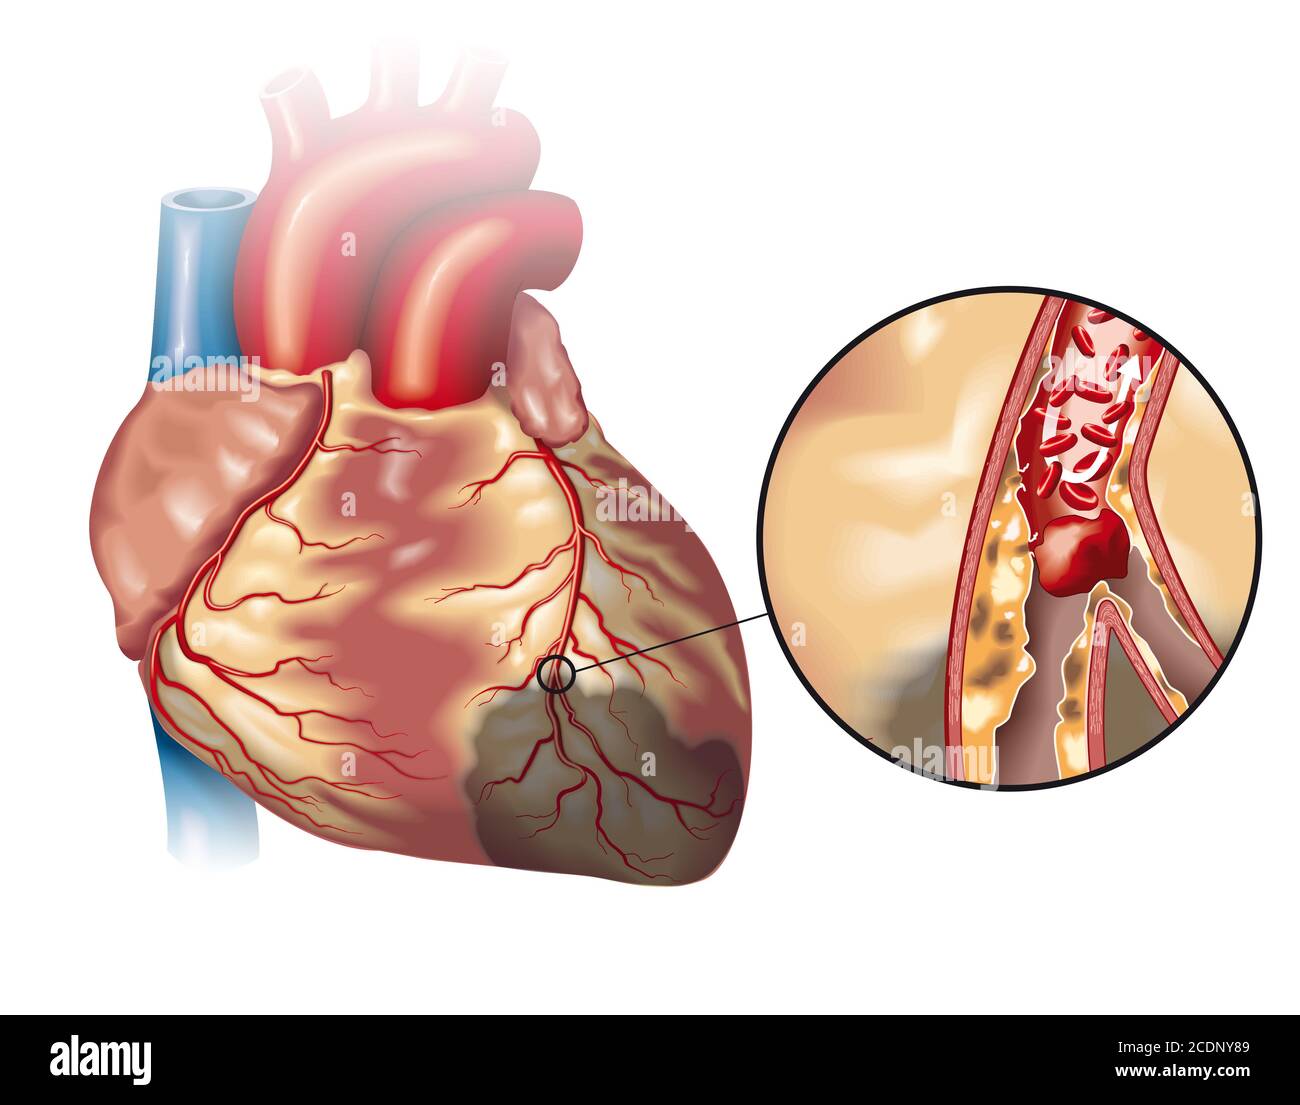 Illustration showing healthy heart (small) and plaque in coronary artery, blood clot (thrombus) breaking off and blocking blood flow (cardiac infarcti Stock Photo